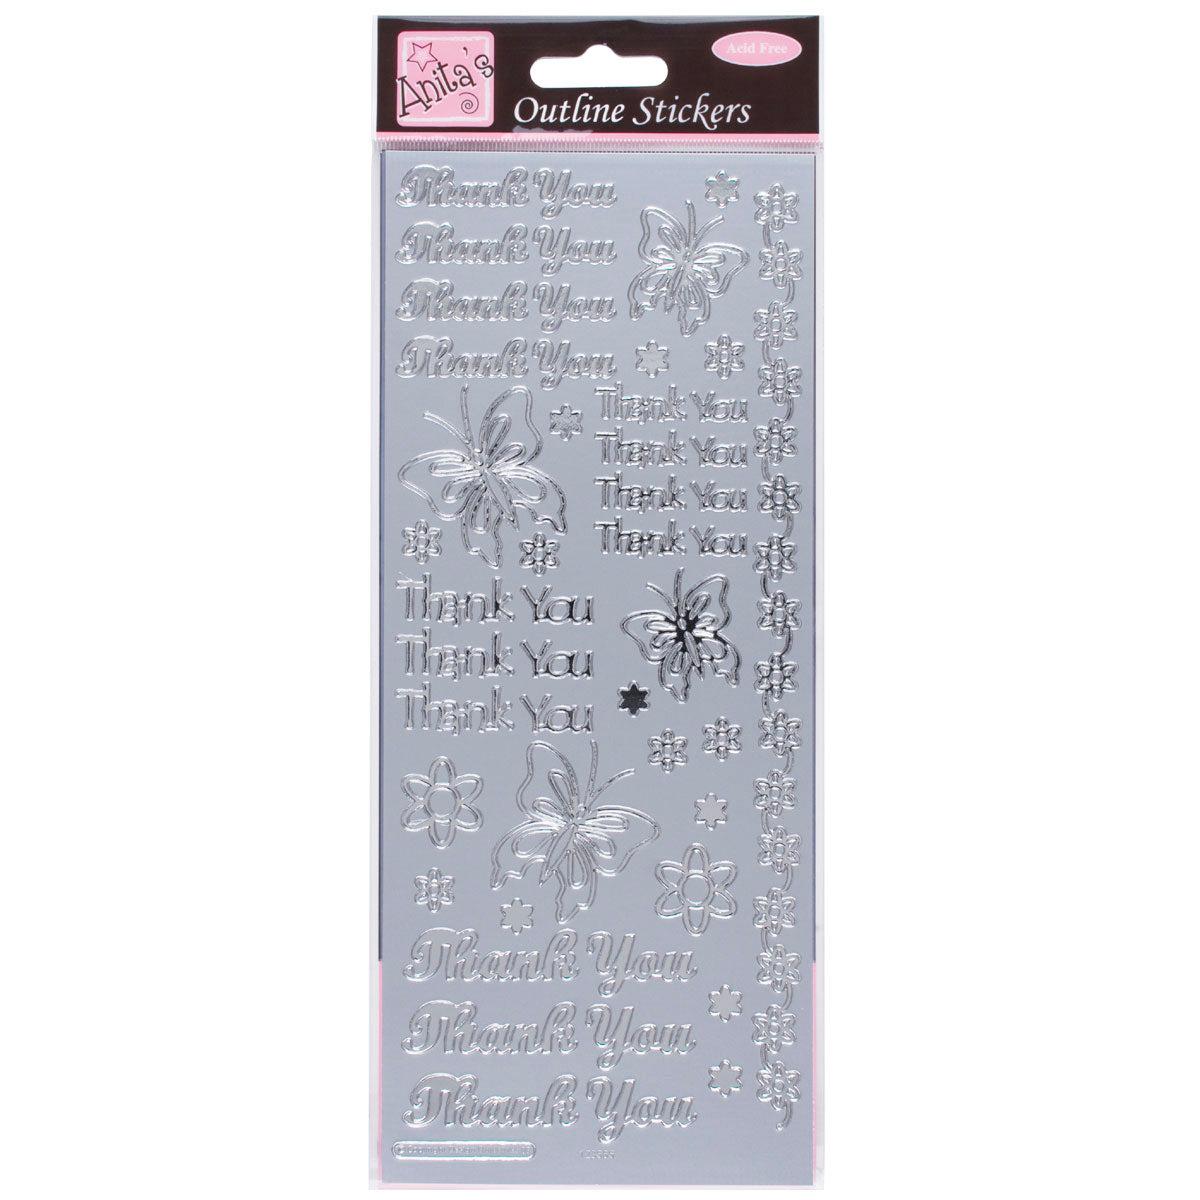 Anitas peel off outline stickers - Thank You silver